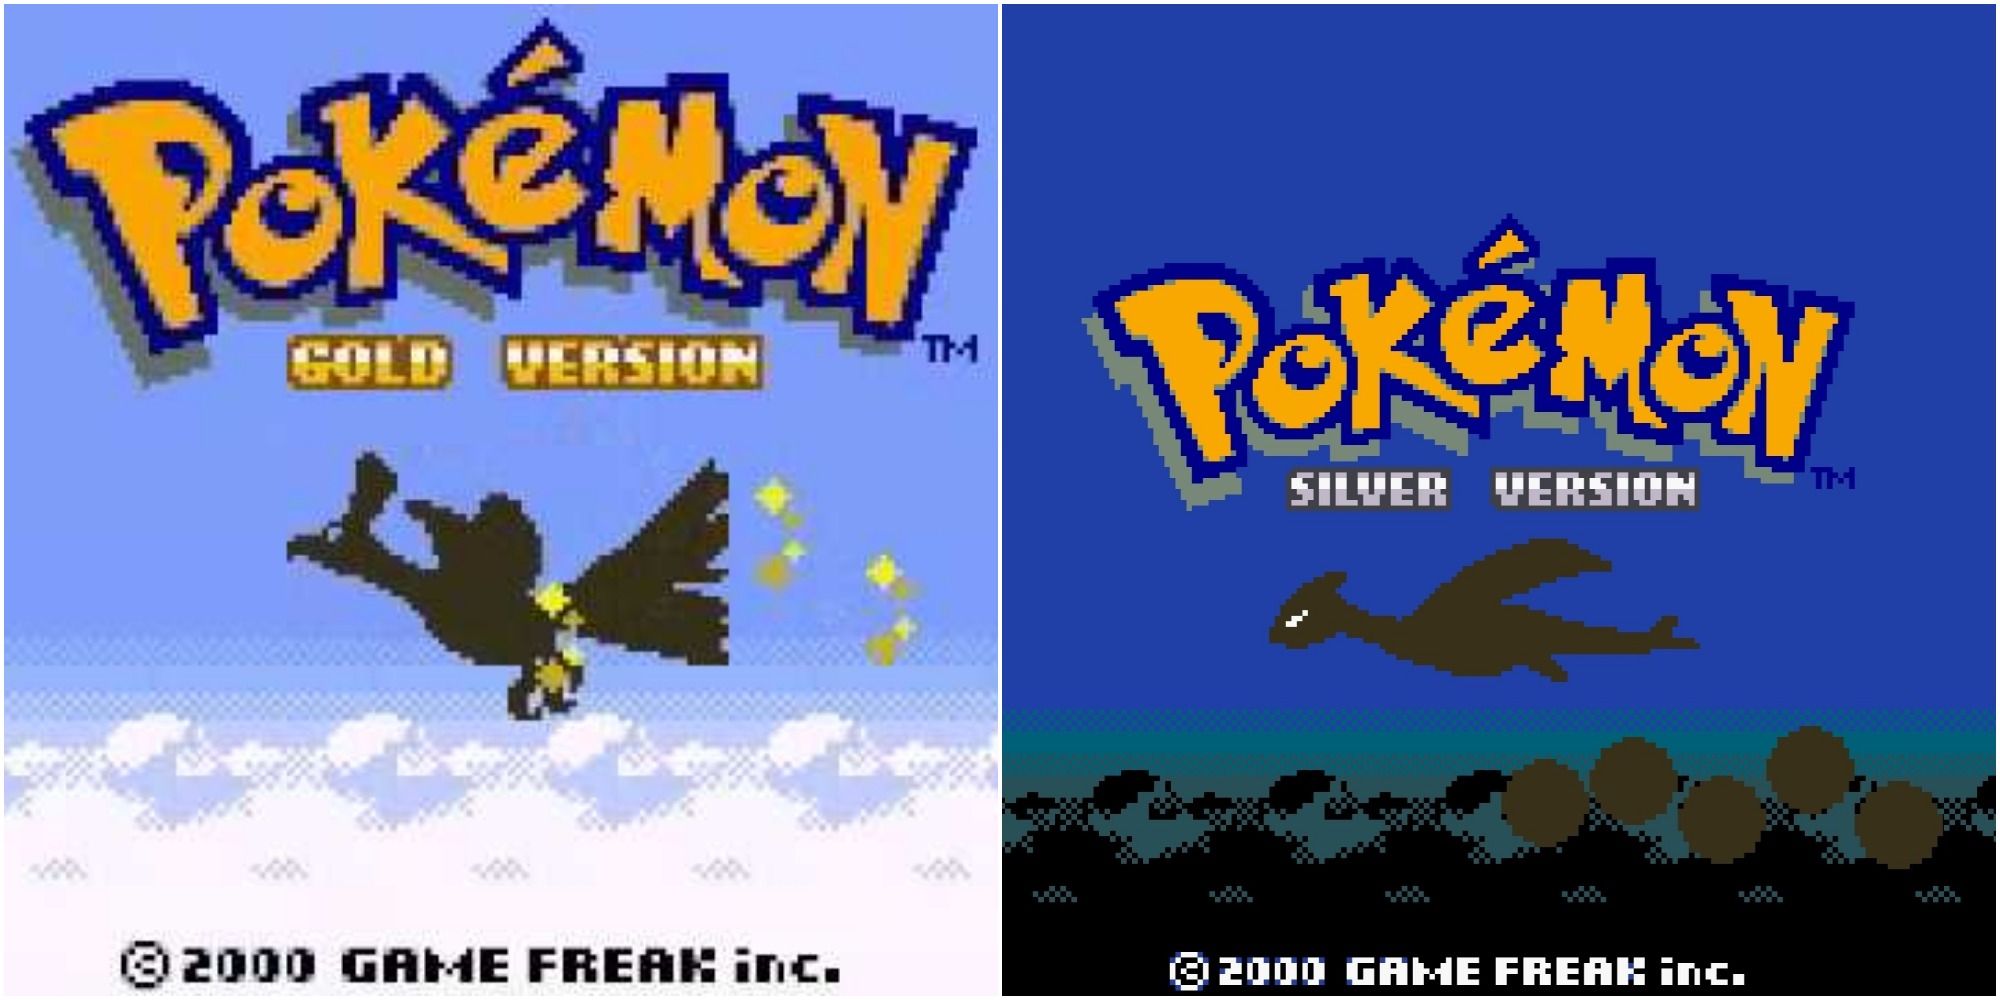 Split image screenshot of the Pokemon Gold and Silver title screens.